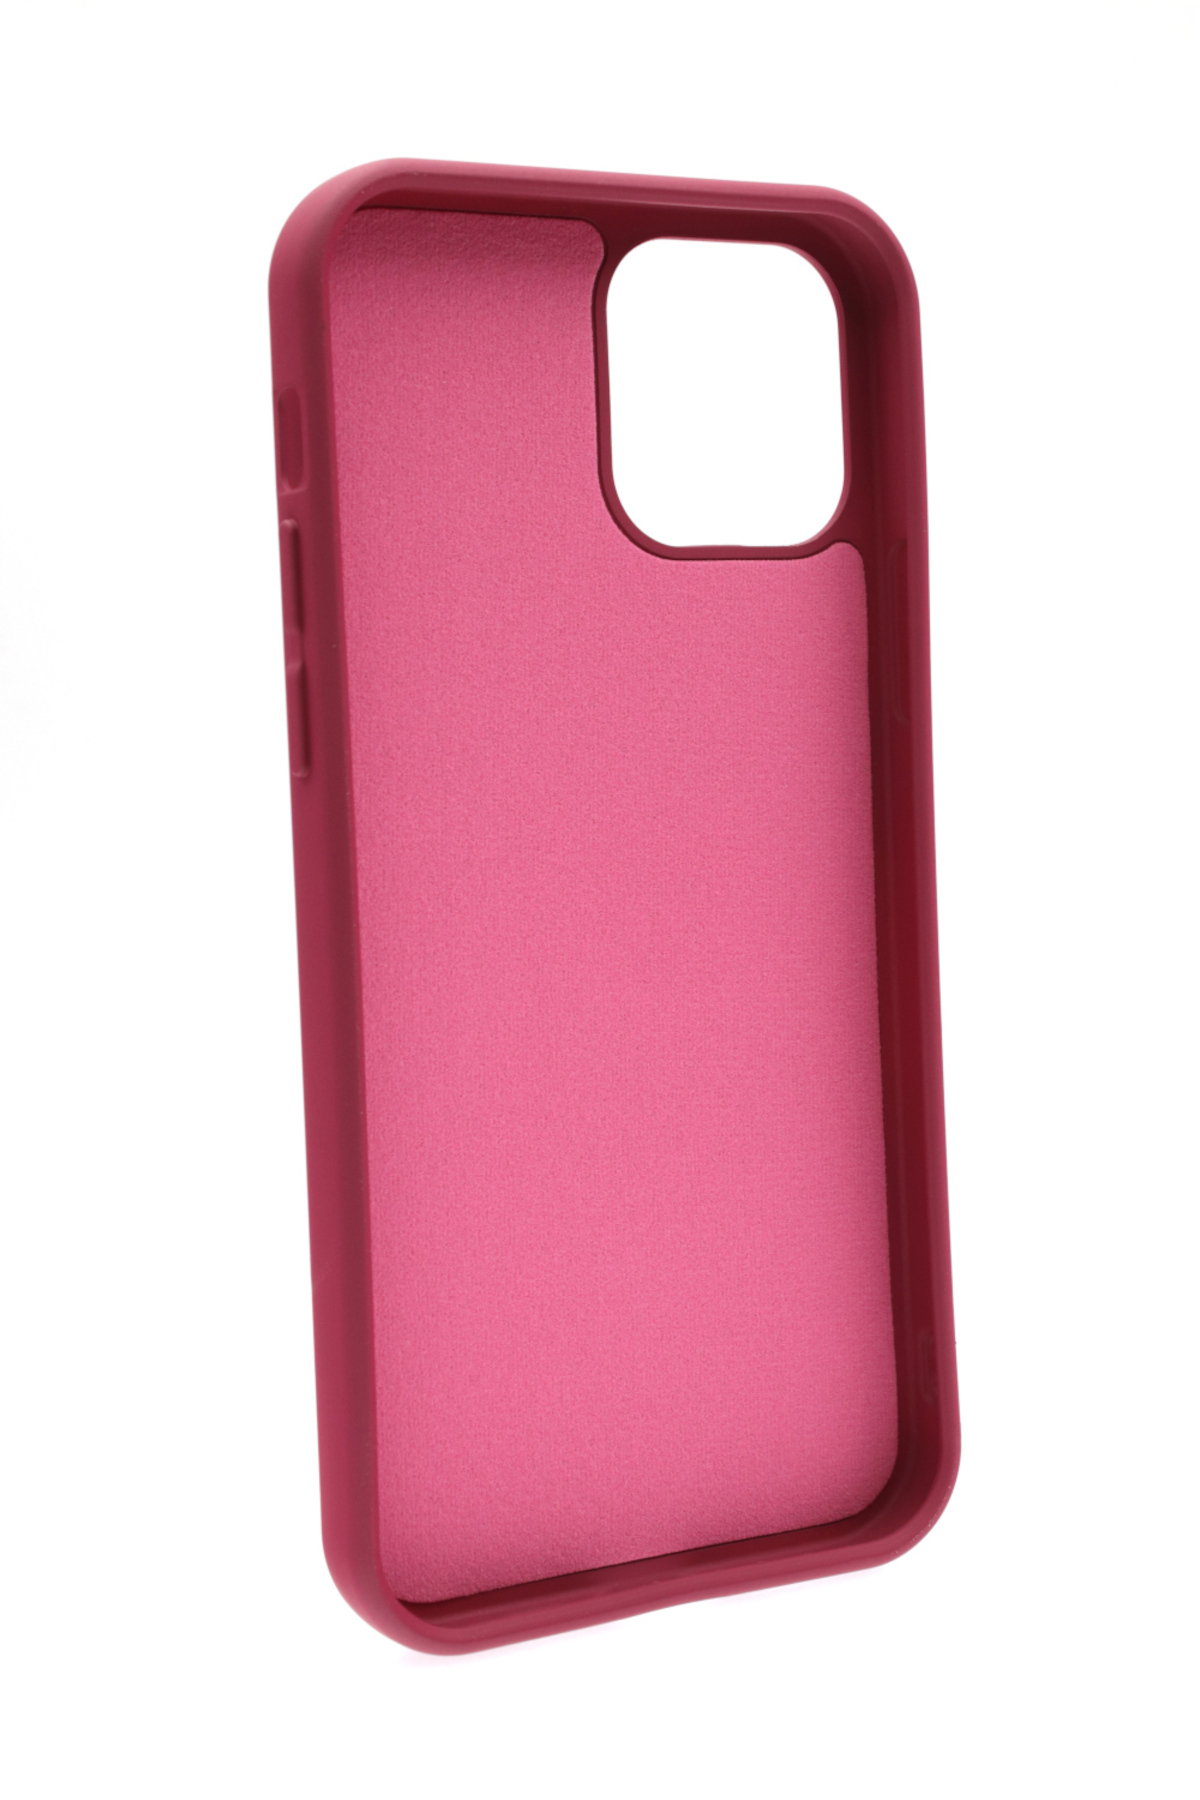 JAMCOVER Silikon iPhone 12, Backcover, Maroon Apple, Pro, 12 iPhone Case